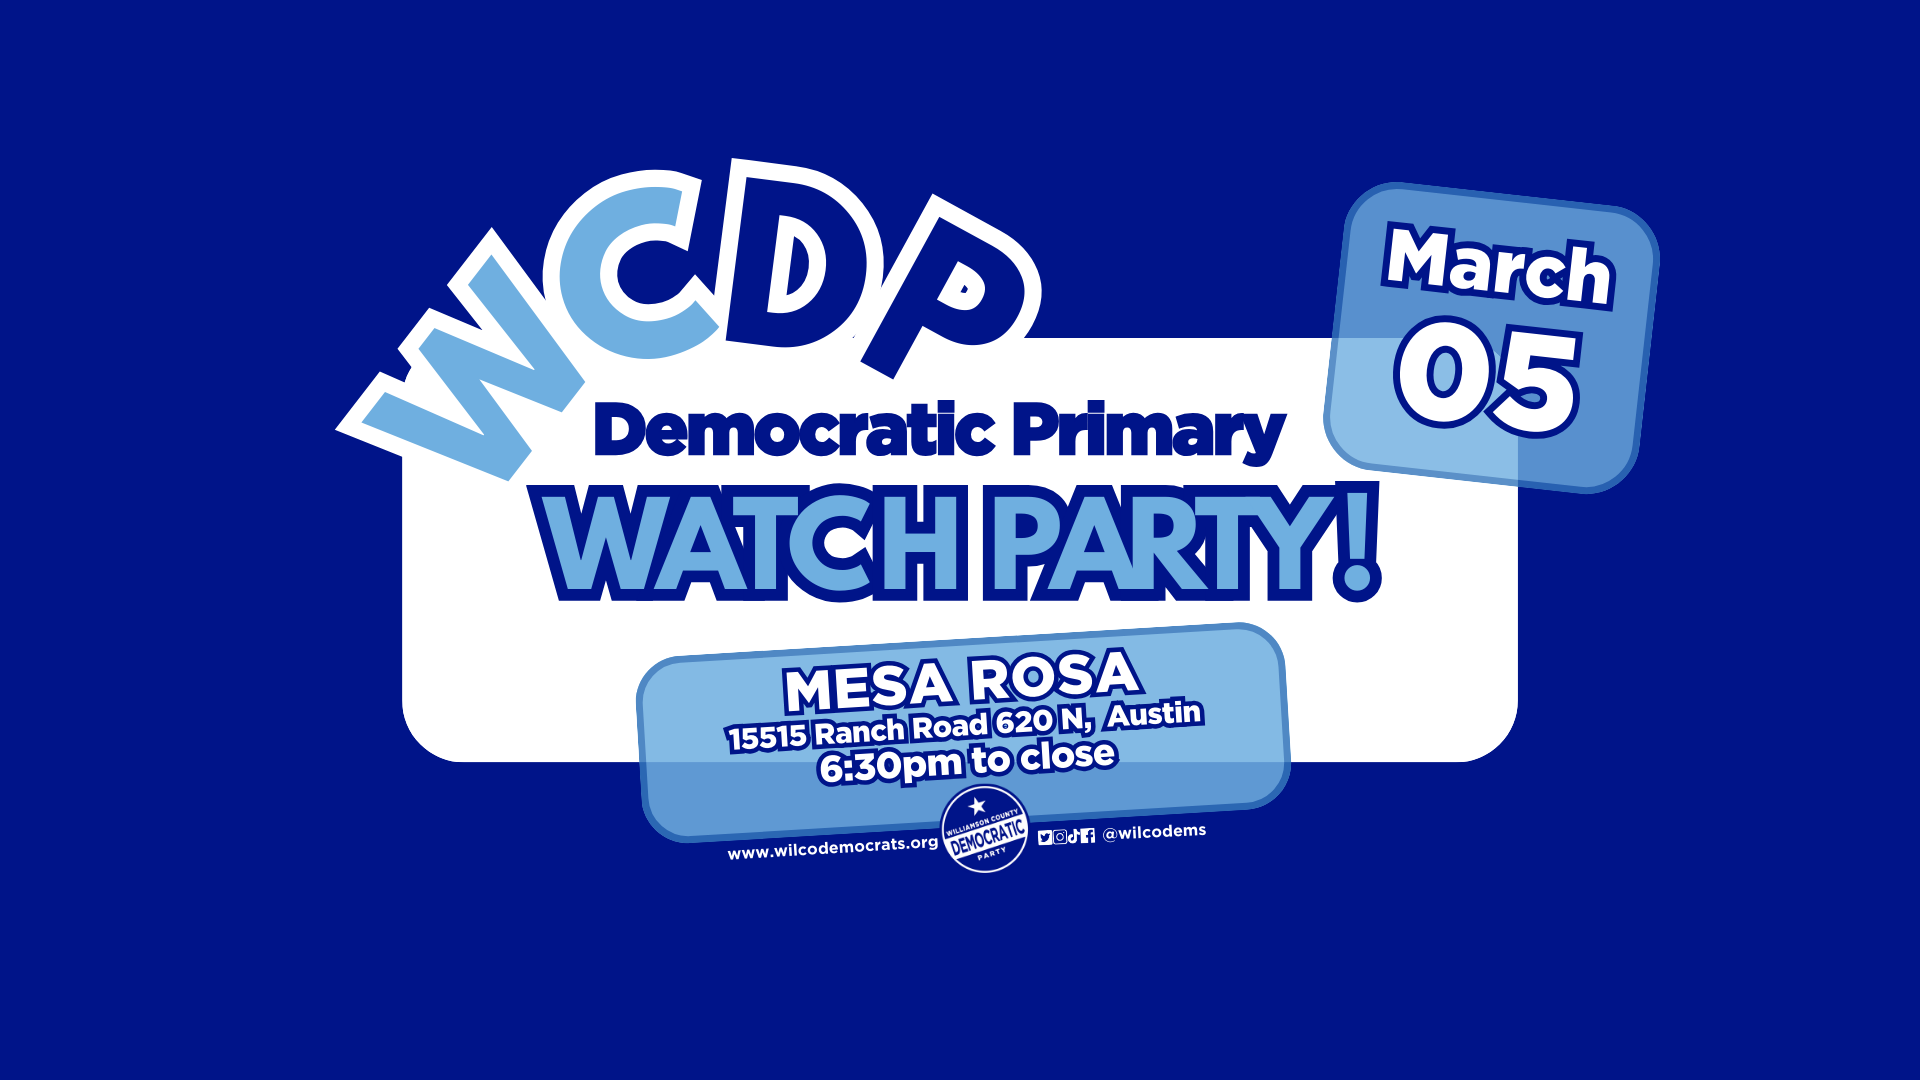 WCDP Democratic Primary Election Results Watch Party